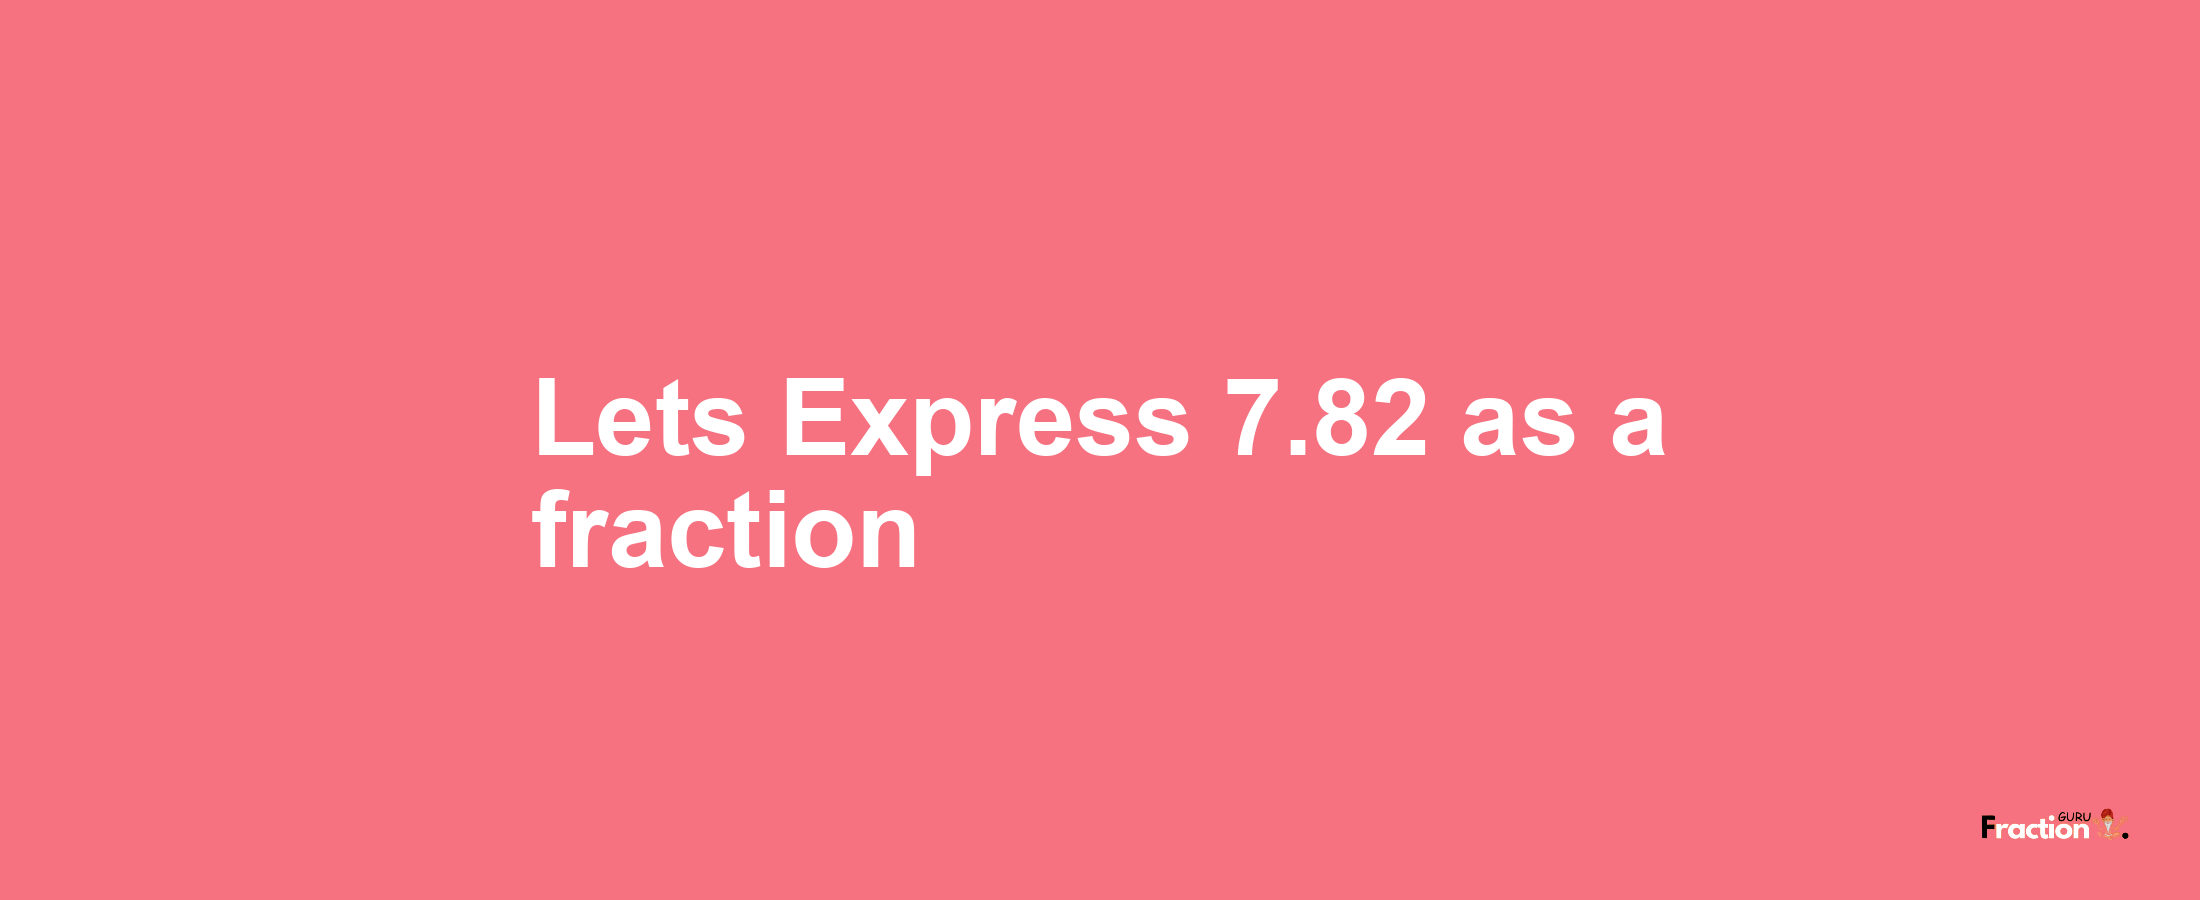 Lets Express 7.82 as afraction